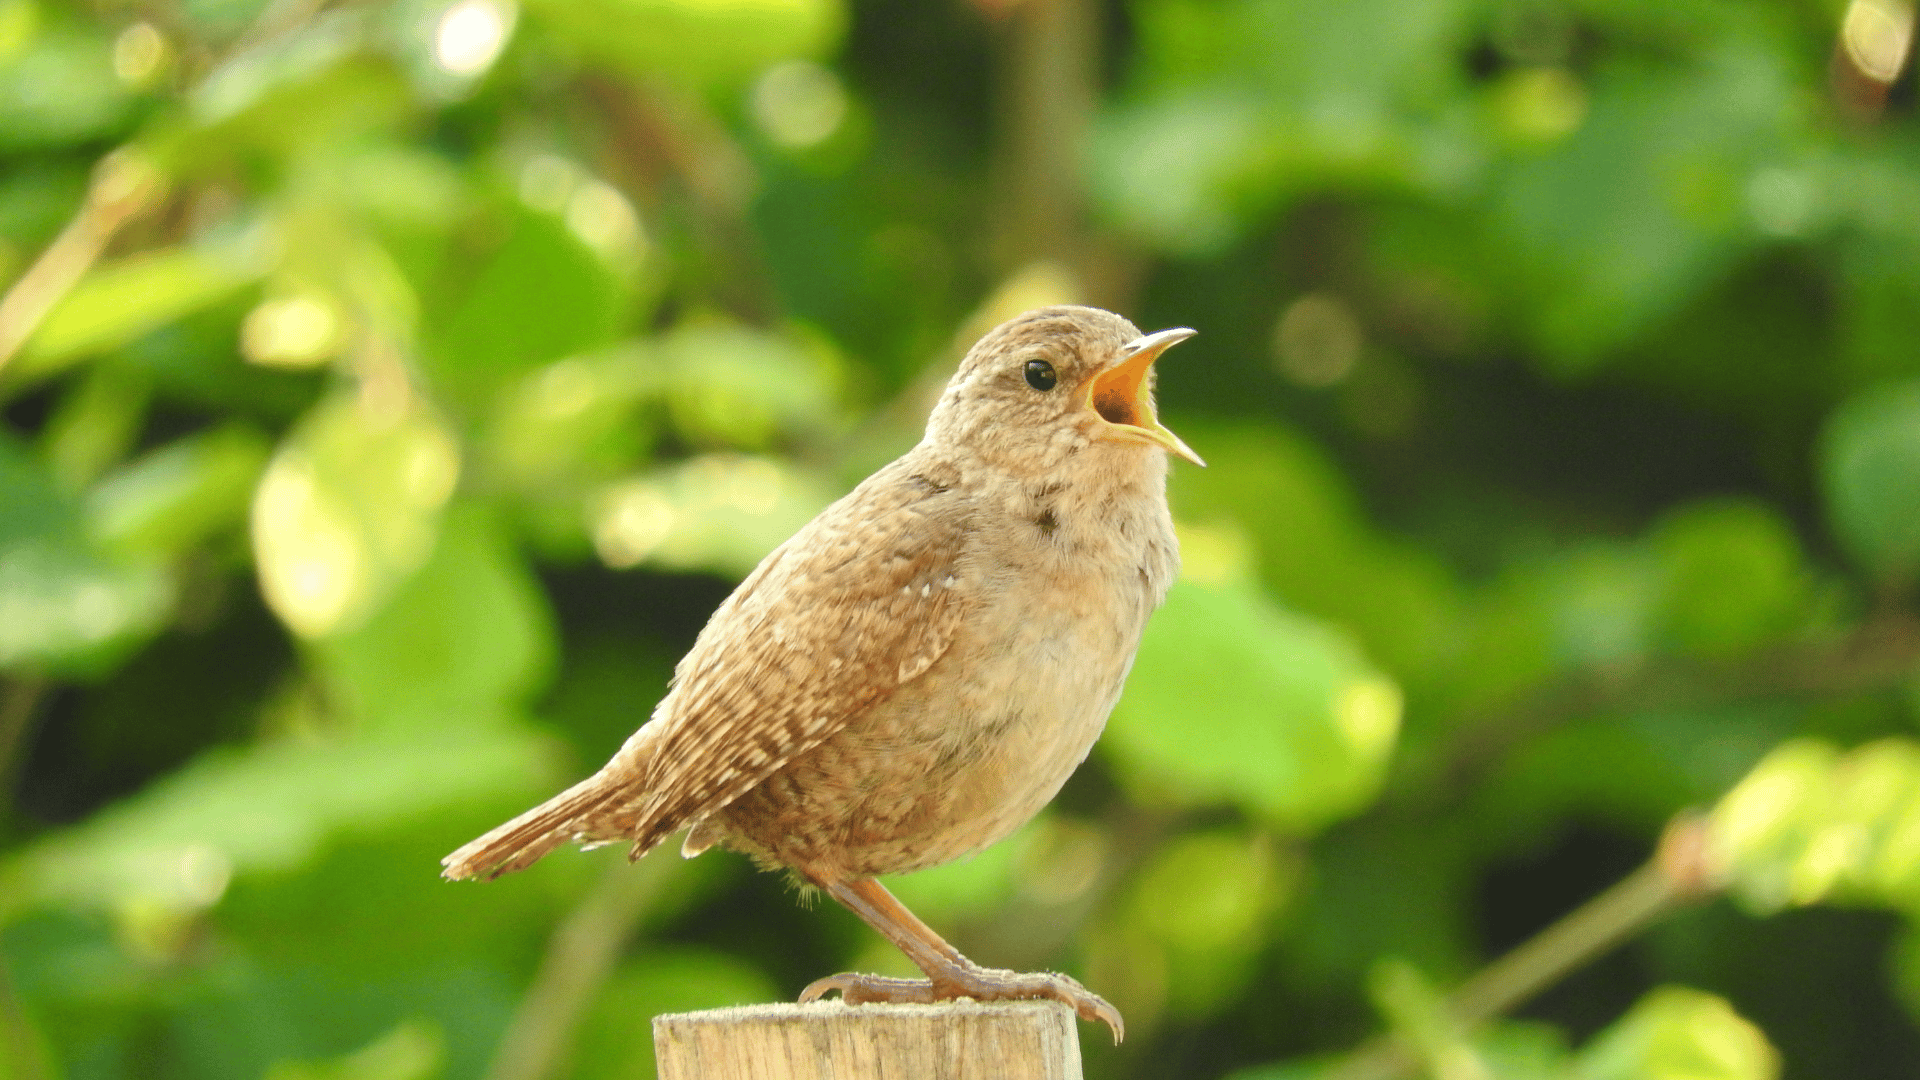 A small brown bird sits in front of green leaves, singing